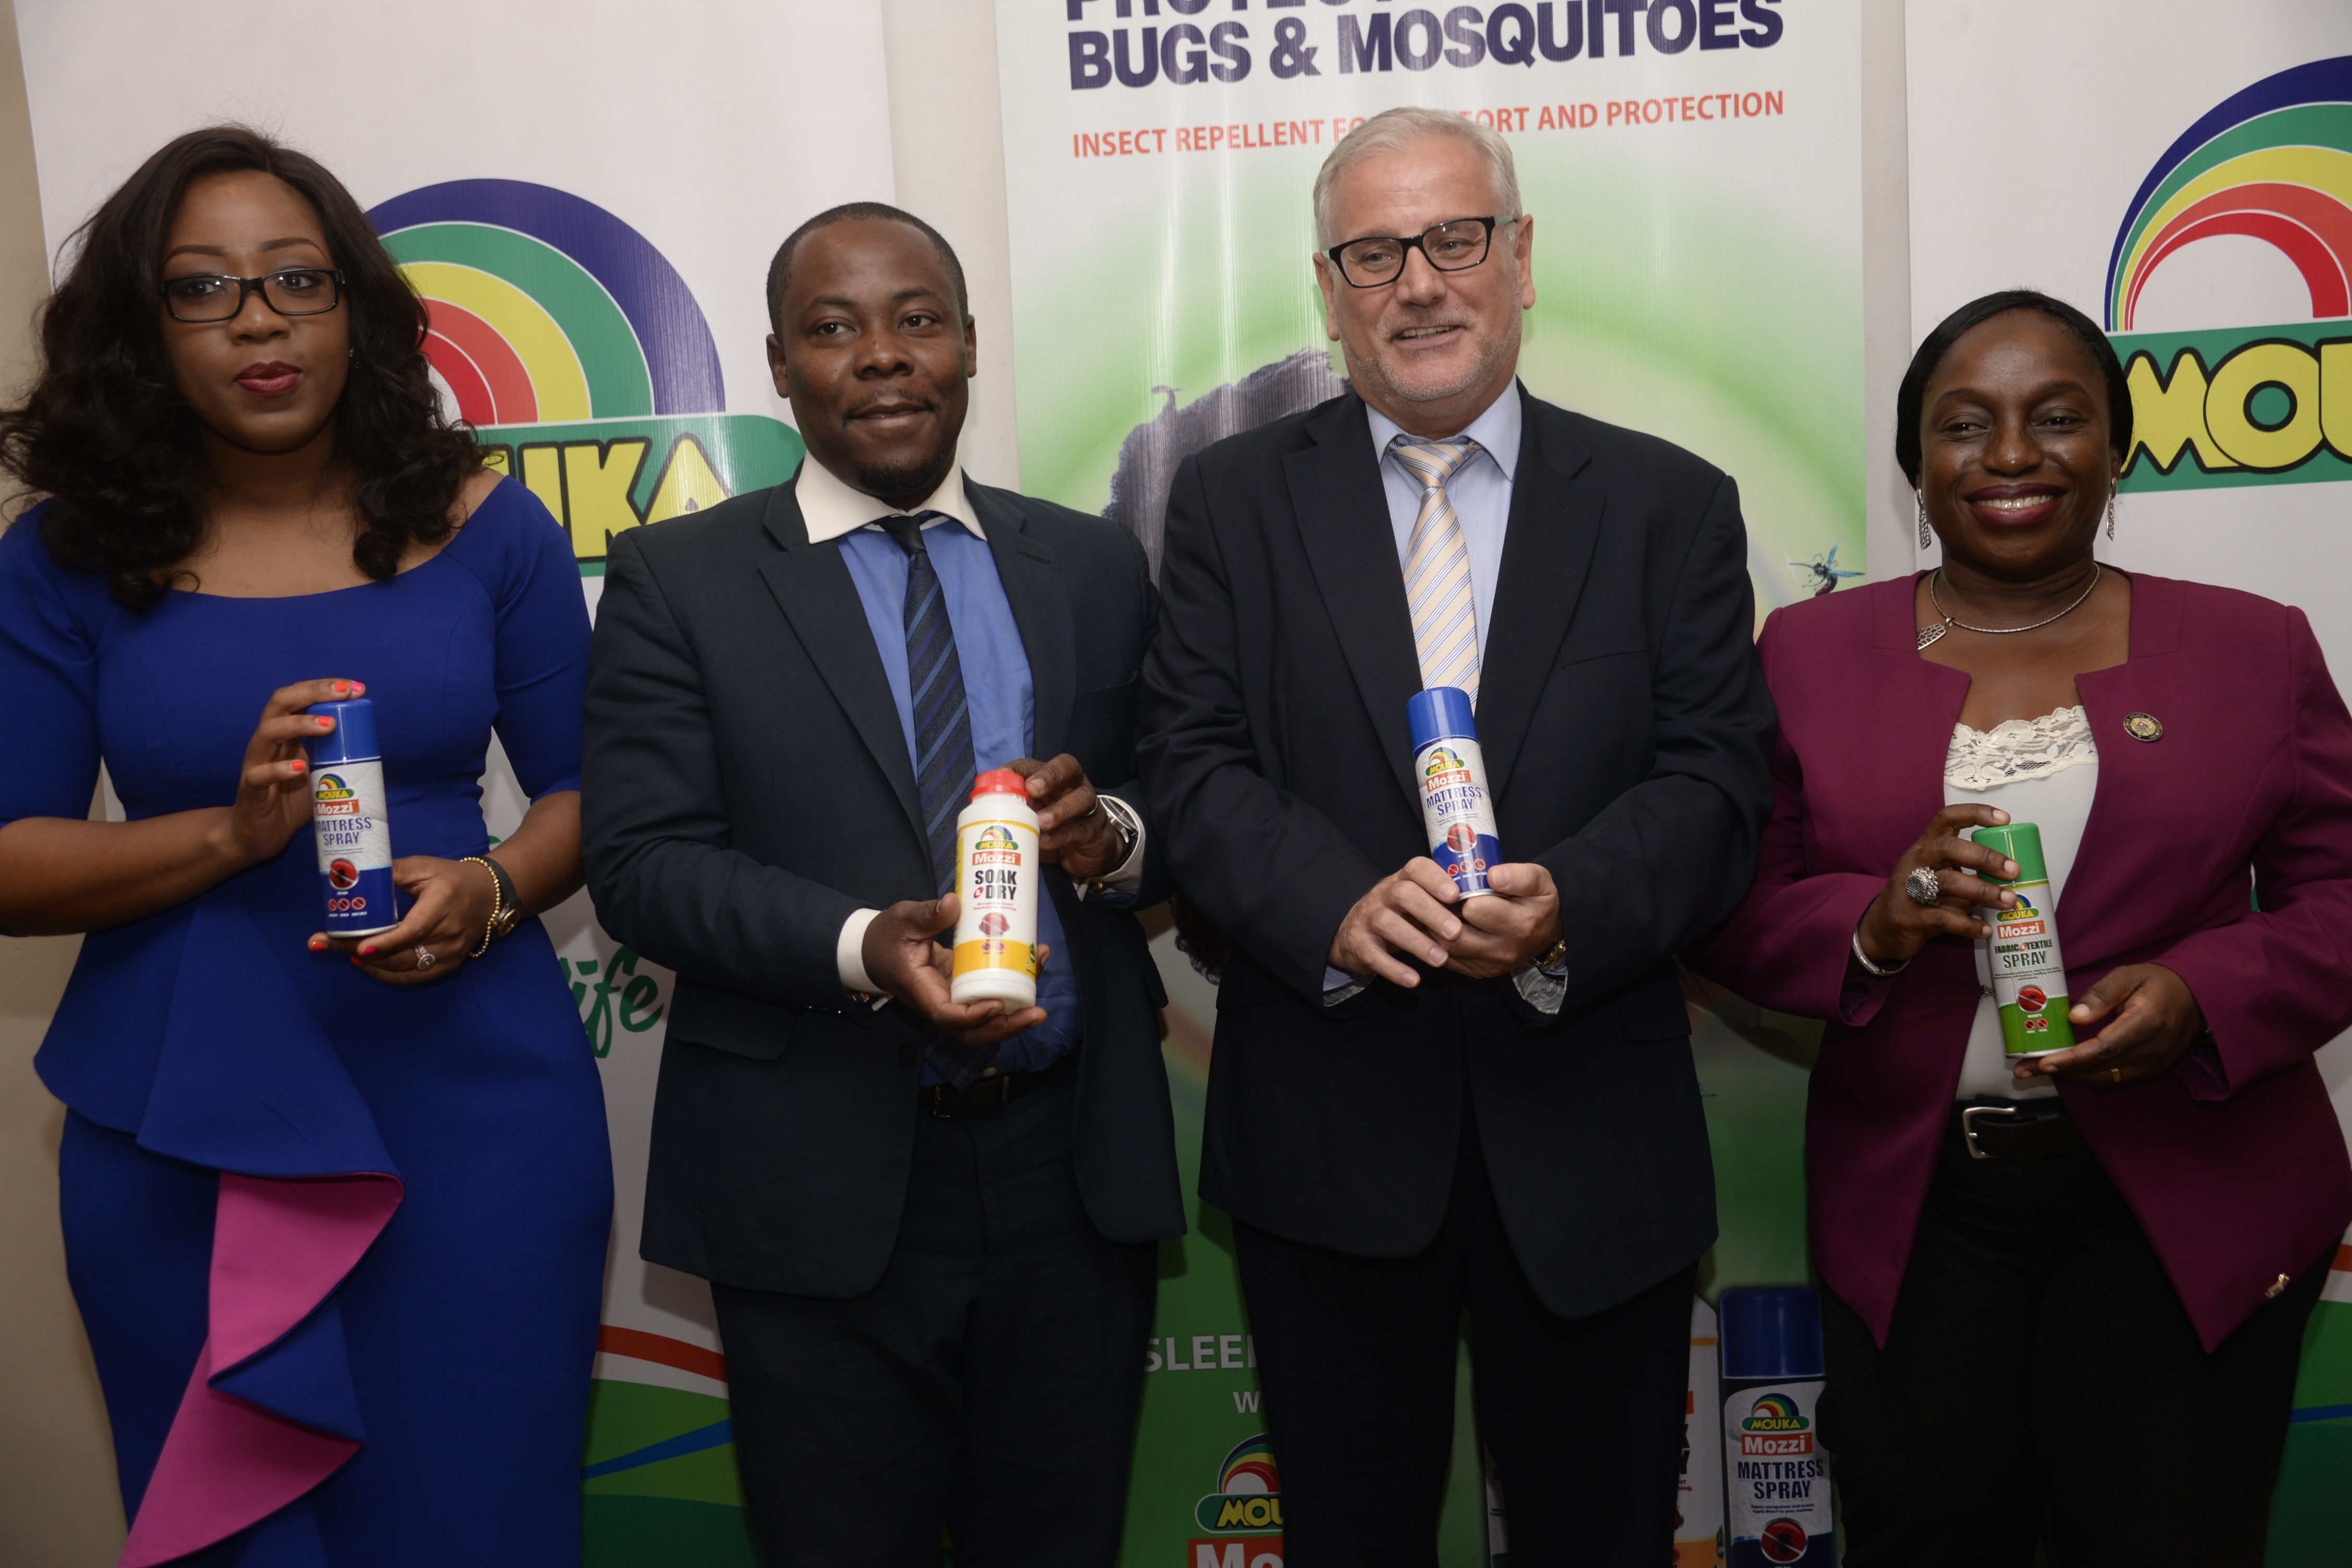 Mouka Limited, Nigeria’s leading manufacturer of mattresses and other bedding products, has launched an innovative range of insect repellents in line with its mission of Adding Comfort to Life.